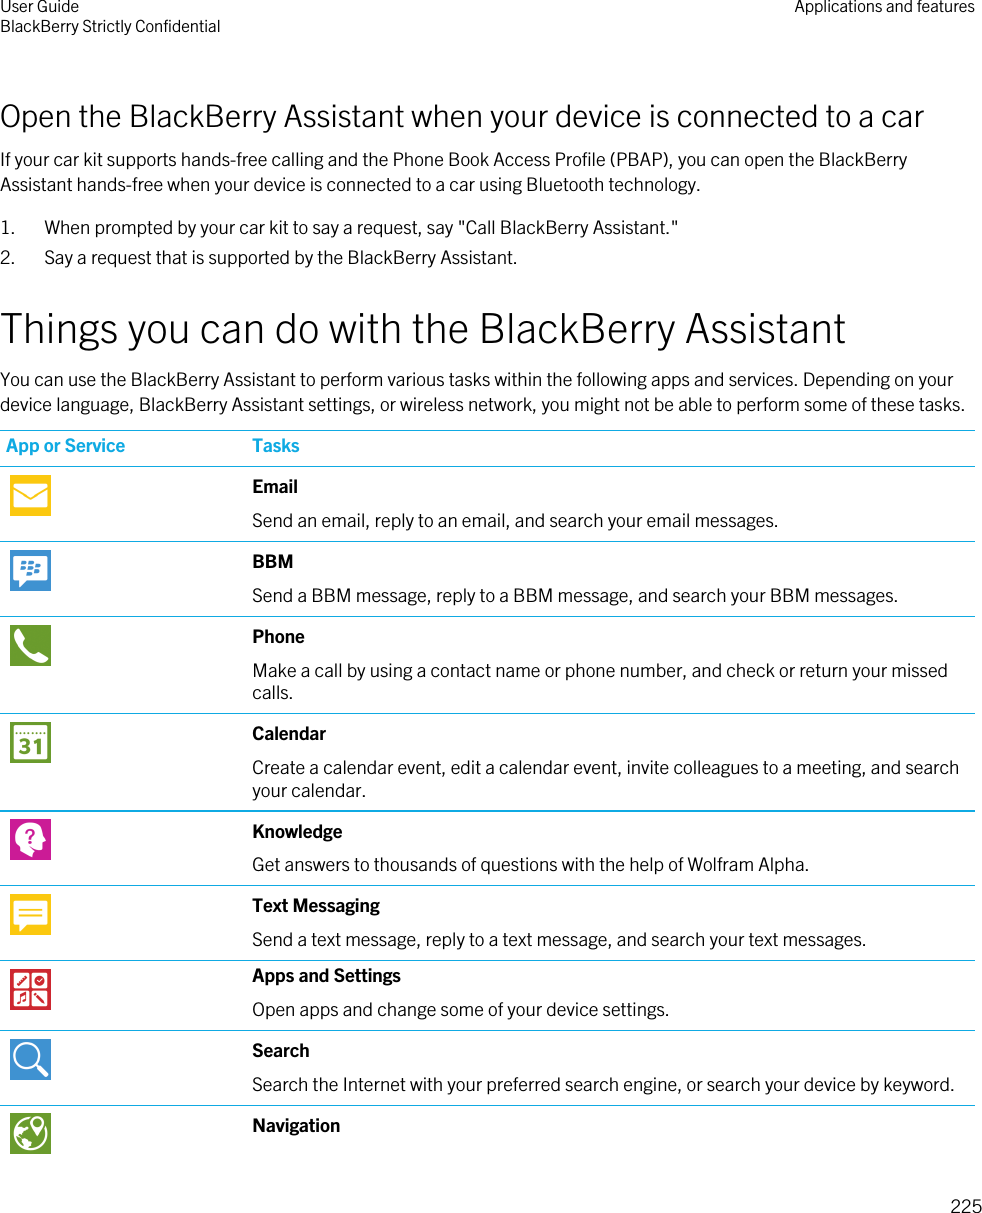 Open the BlackBerry Assistant when your device is connected to a carIf your car kit supports hands-free calling and the Phone Book Access Profile (PBAP), you can open the BlackBerry Assistant hands-free when your device is connected to a car using Bluetooth technology.1. When prompted by your car kit to say a request, say &quot;Call BlackBerry Assistant.&quot;2. Say a request that is supported by the BlackBerry Assistant.Things you can do with the BlackBerry AssistantYou can use the BlackBerry Assistant to perform various tasks within the following apps and services. Depending on your device language, BlackBerry Assistant settings, or wireless network, you might not be able to perform some of these tasks.App or Service TasksEmailSend an email, reply to an email, and search your email messages.BBMSend a BBM message, reply to a BBM message, and search your BBM messages.PhoneMake a call by using a contact name or phone number, and check or return your missed calls.CalendarCreate a calendar event, edit a calendar event, invite colleagues to a meeting, and search your calendar.KnowledgeGet answers to thousands of questions with the help of Wolfram Alpha.Text MessagingSend a text message, reply to a text message, and search your text messages.Apps and SettingsOpen apps and change some of your device settings.SearchSearch the Internet with your preferred search engine, or search your device by keyword.NavigationUser GuideBlackBerry Strictly Confidential Applications and features225